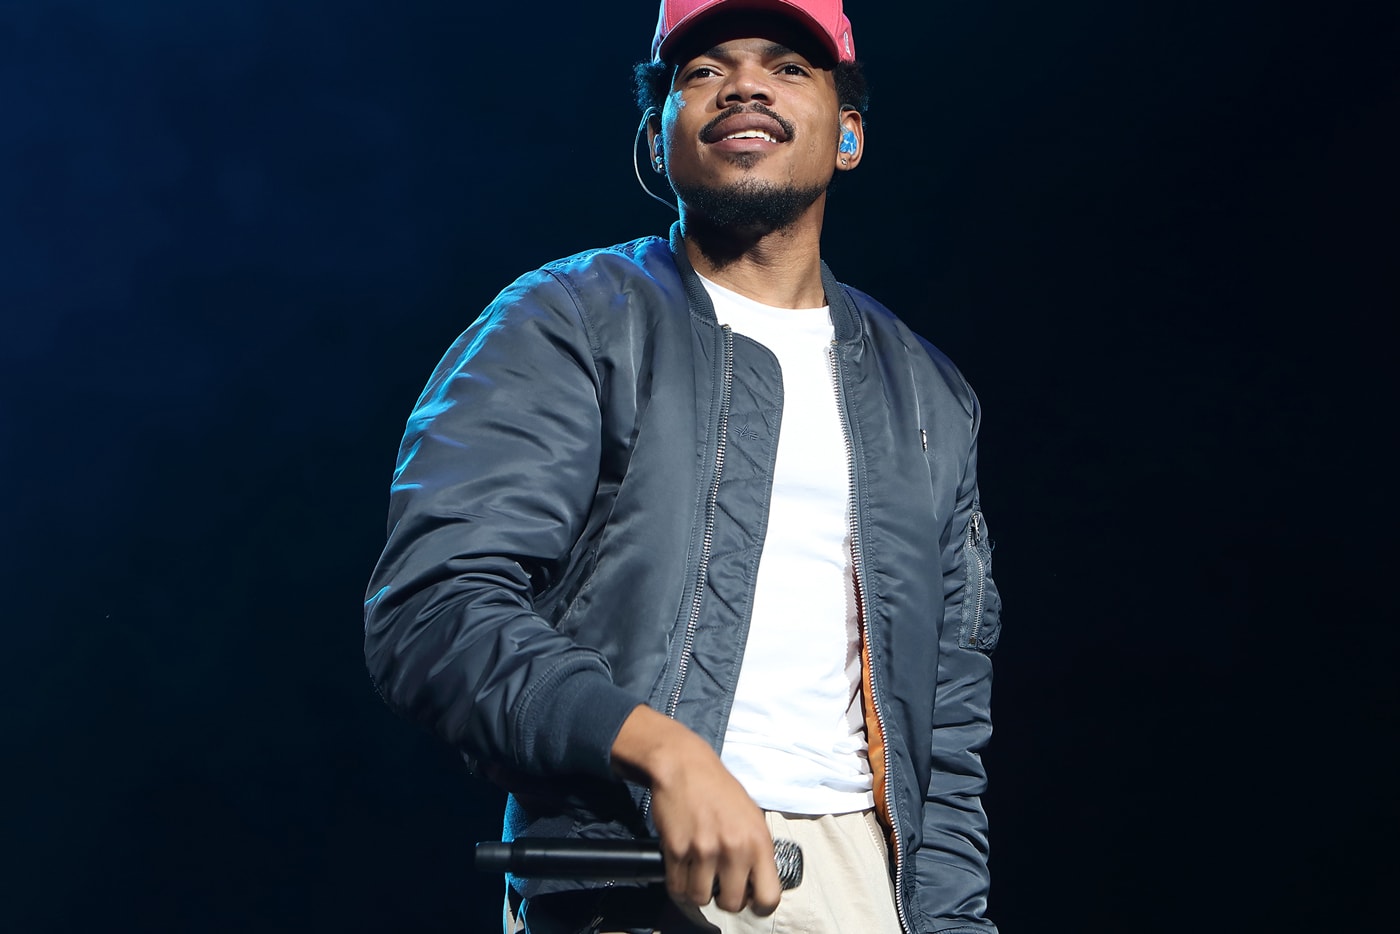 NPR Challenges Chance the Rapper with Saran The Wrapper Quiz